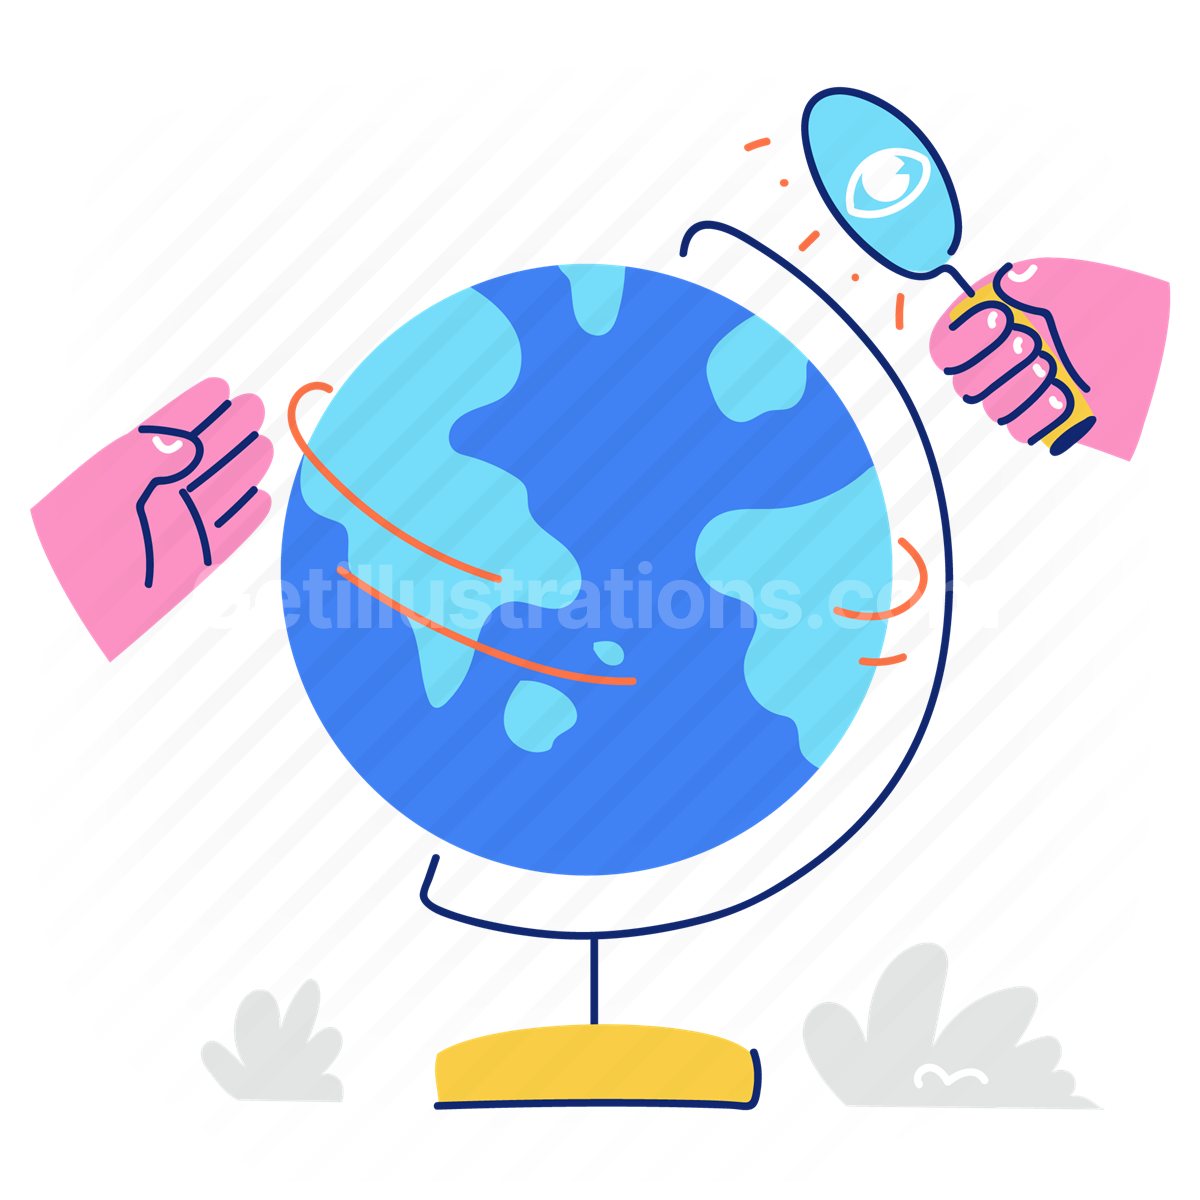 global, international, globe, earth, planet, search, find, magnifier